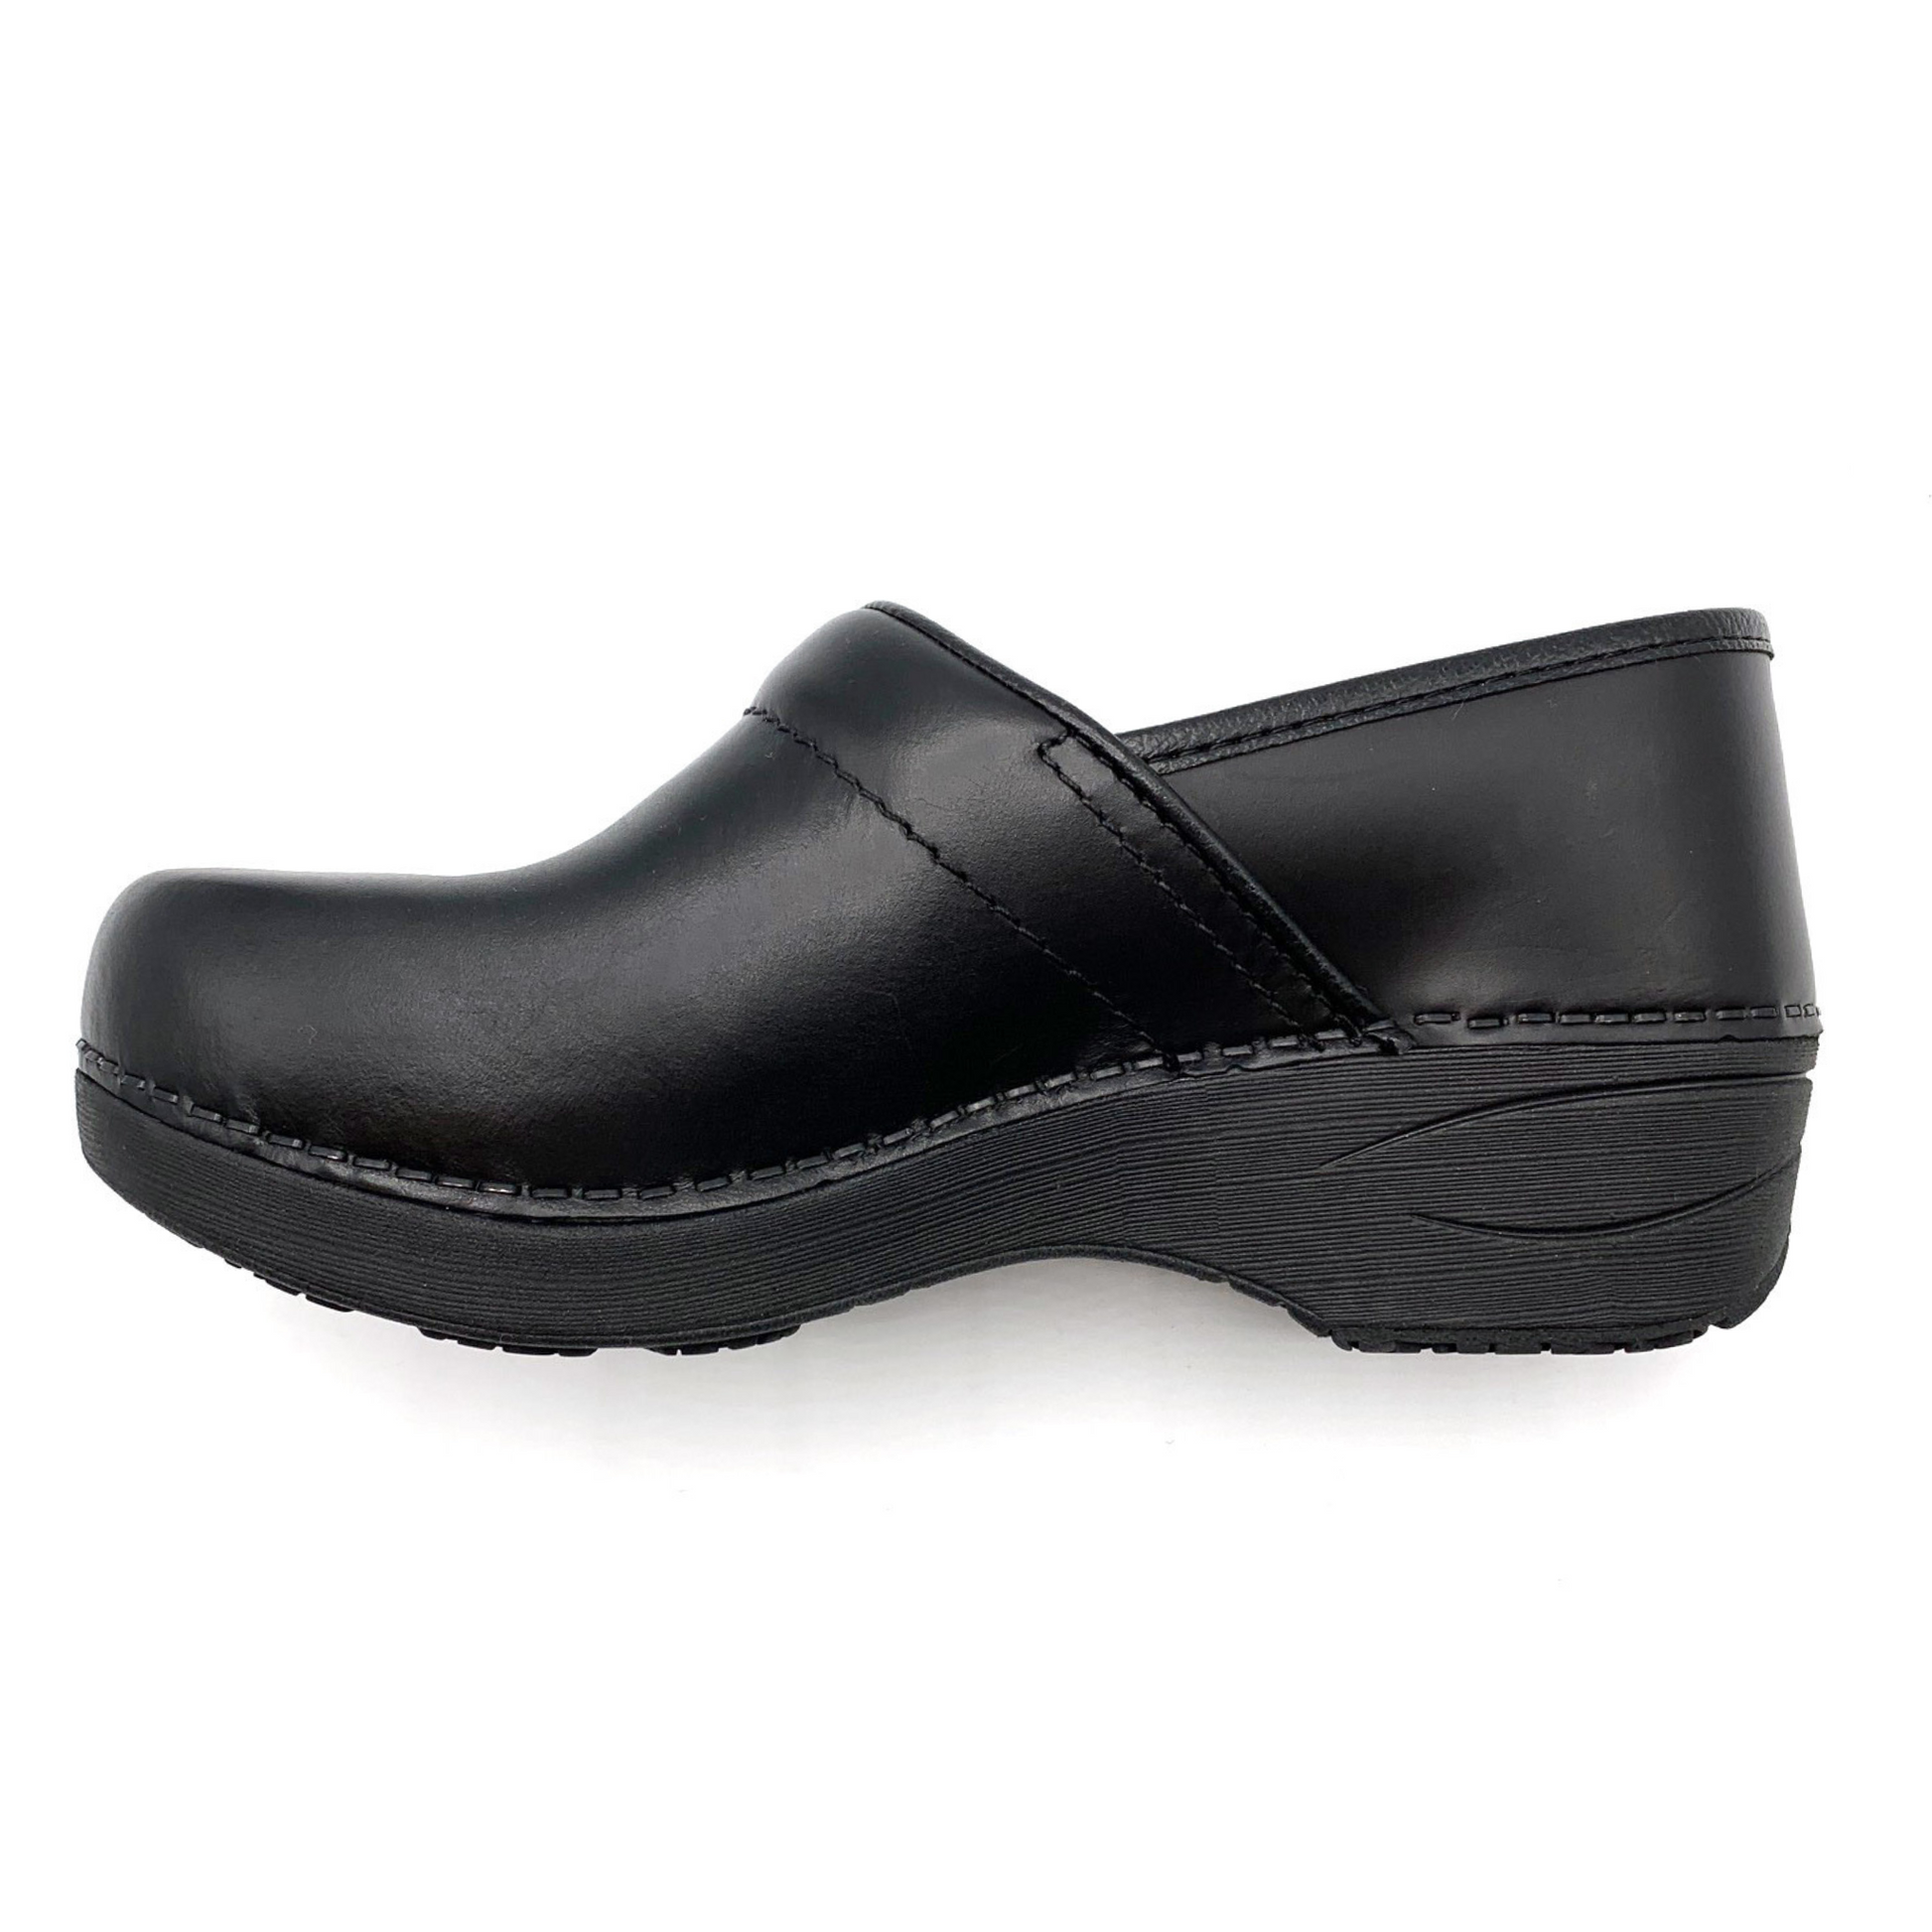 Left side view of the clog showing the soft heel and side stitching.